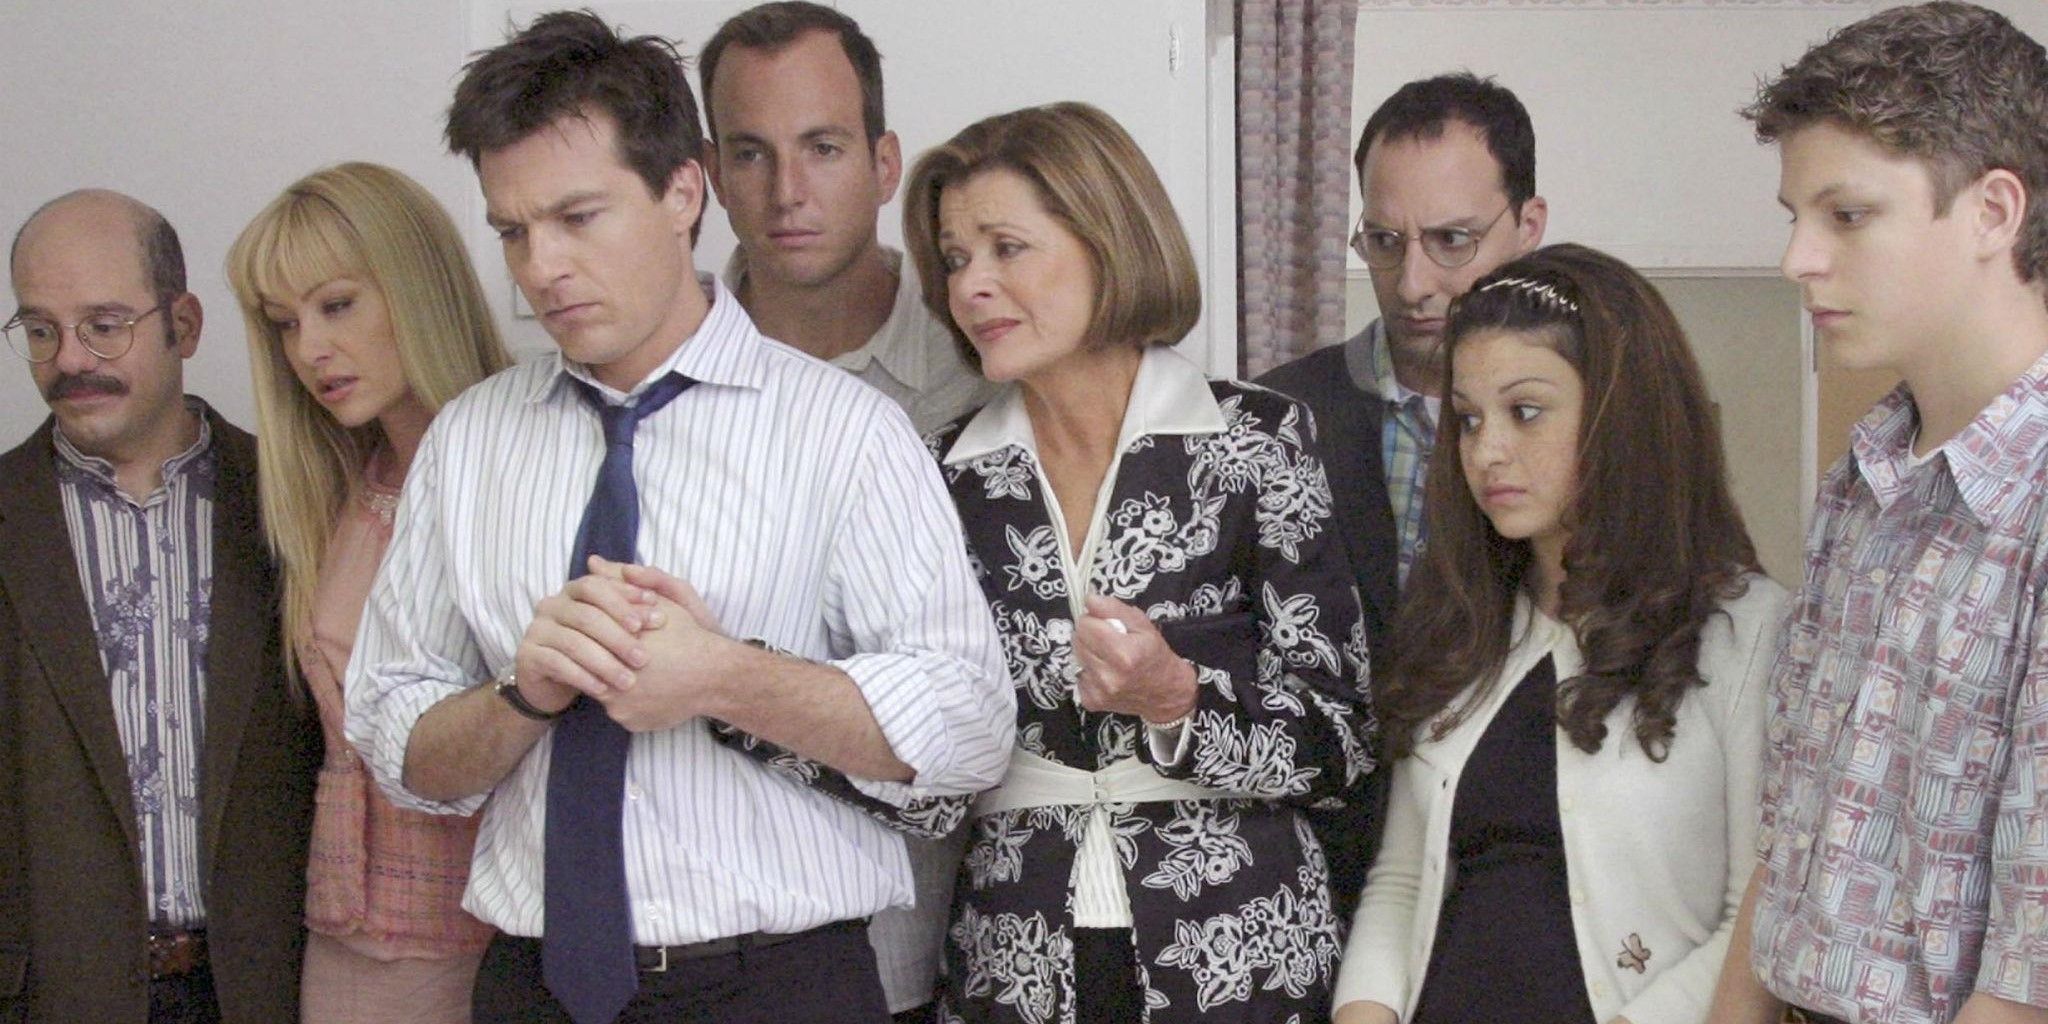 The main cast of Arrested Development